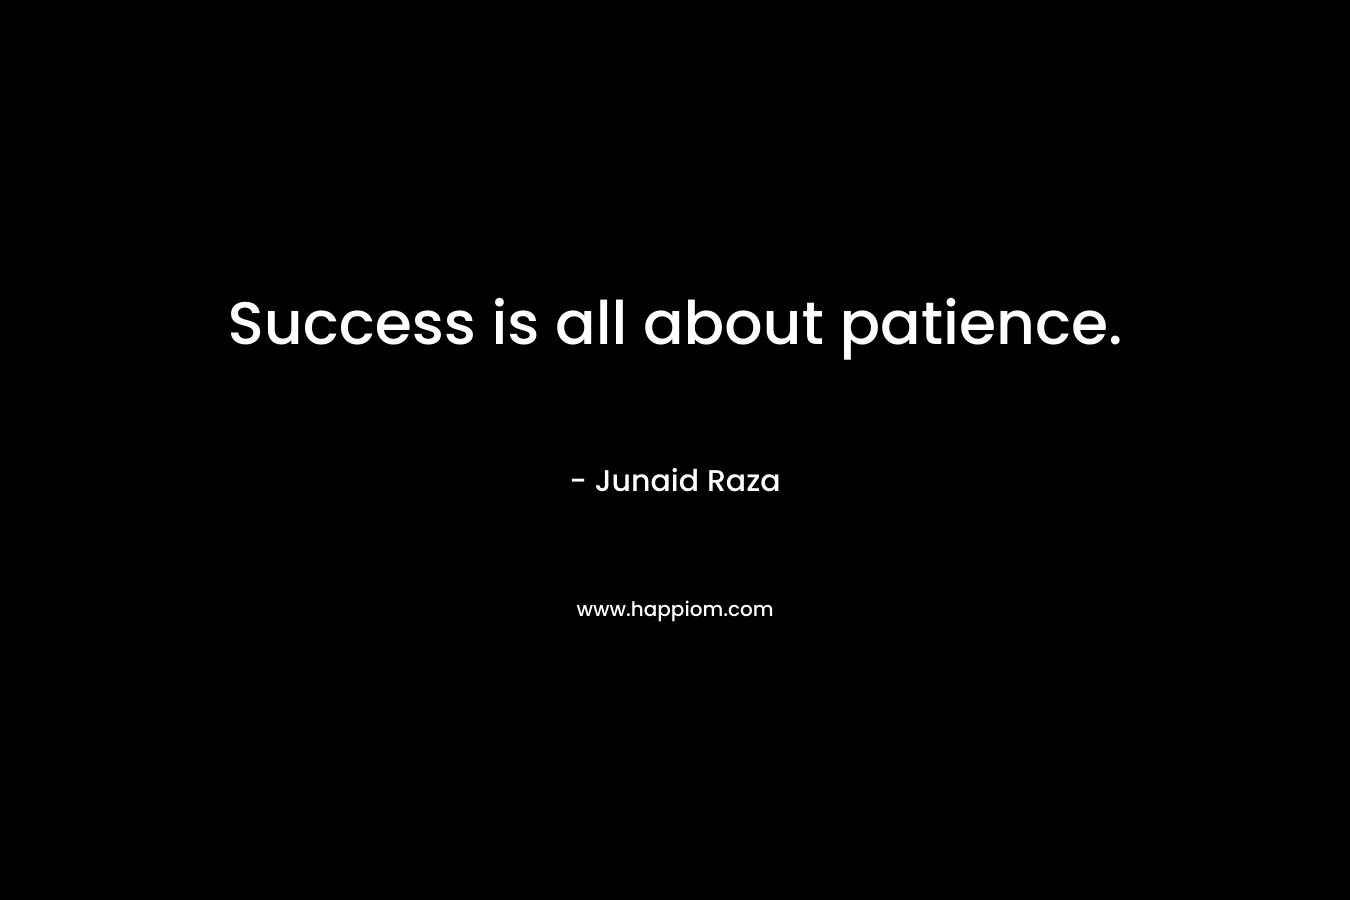 Success is all about patience.